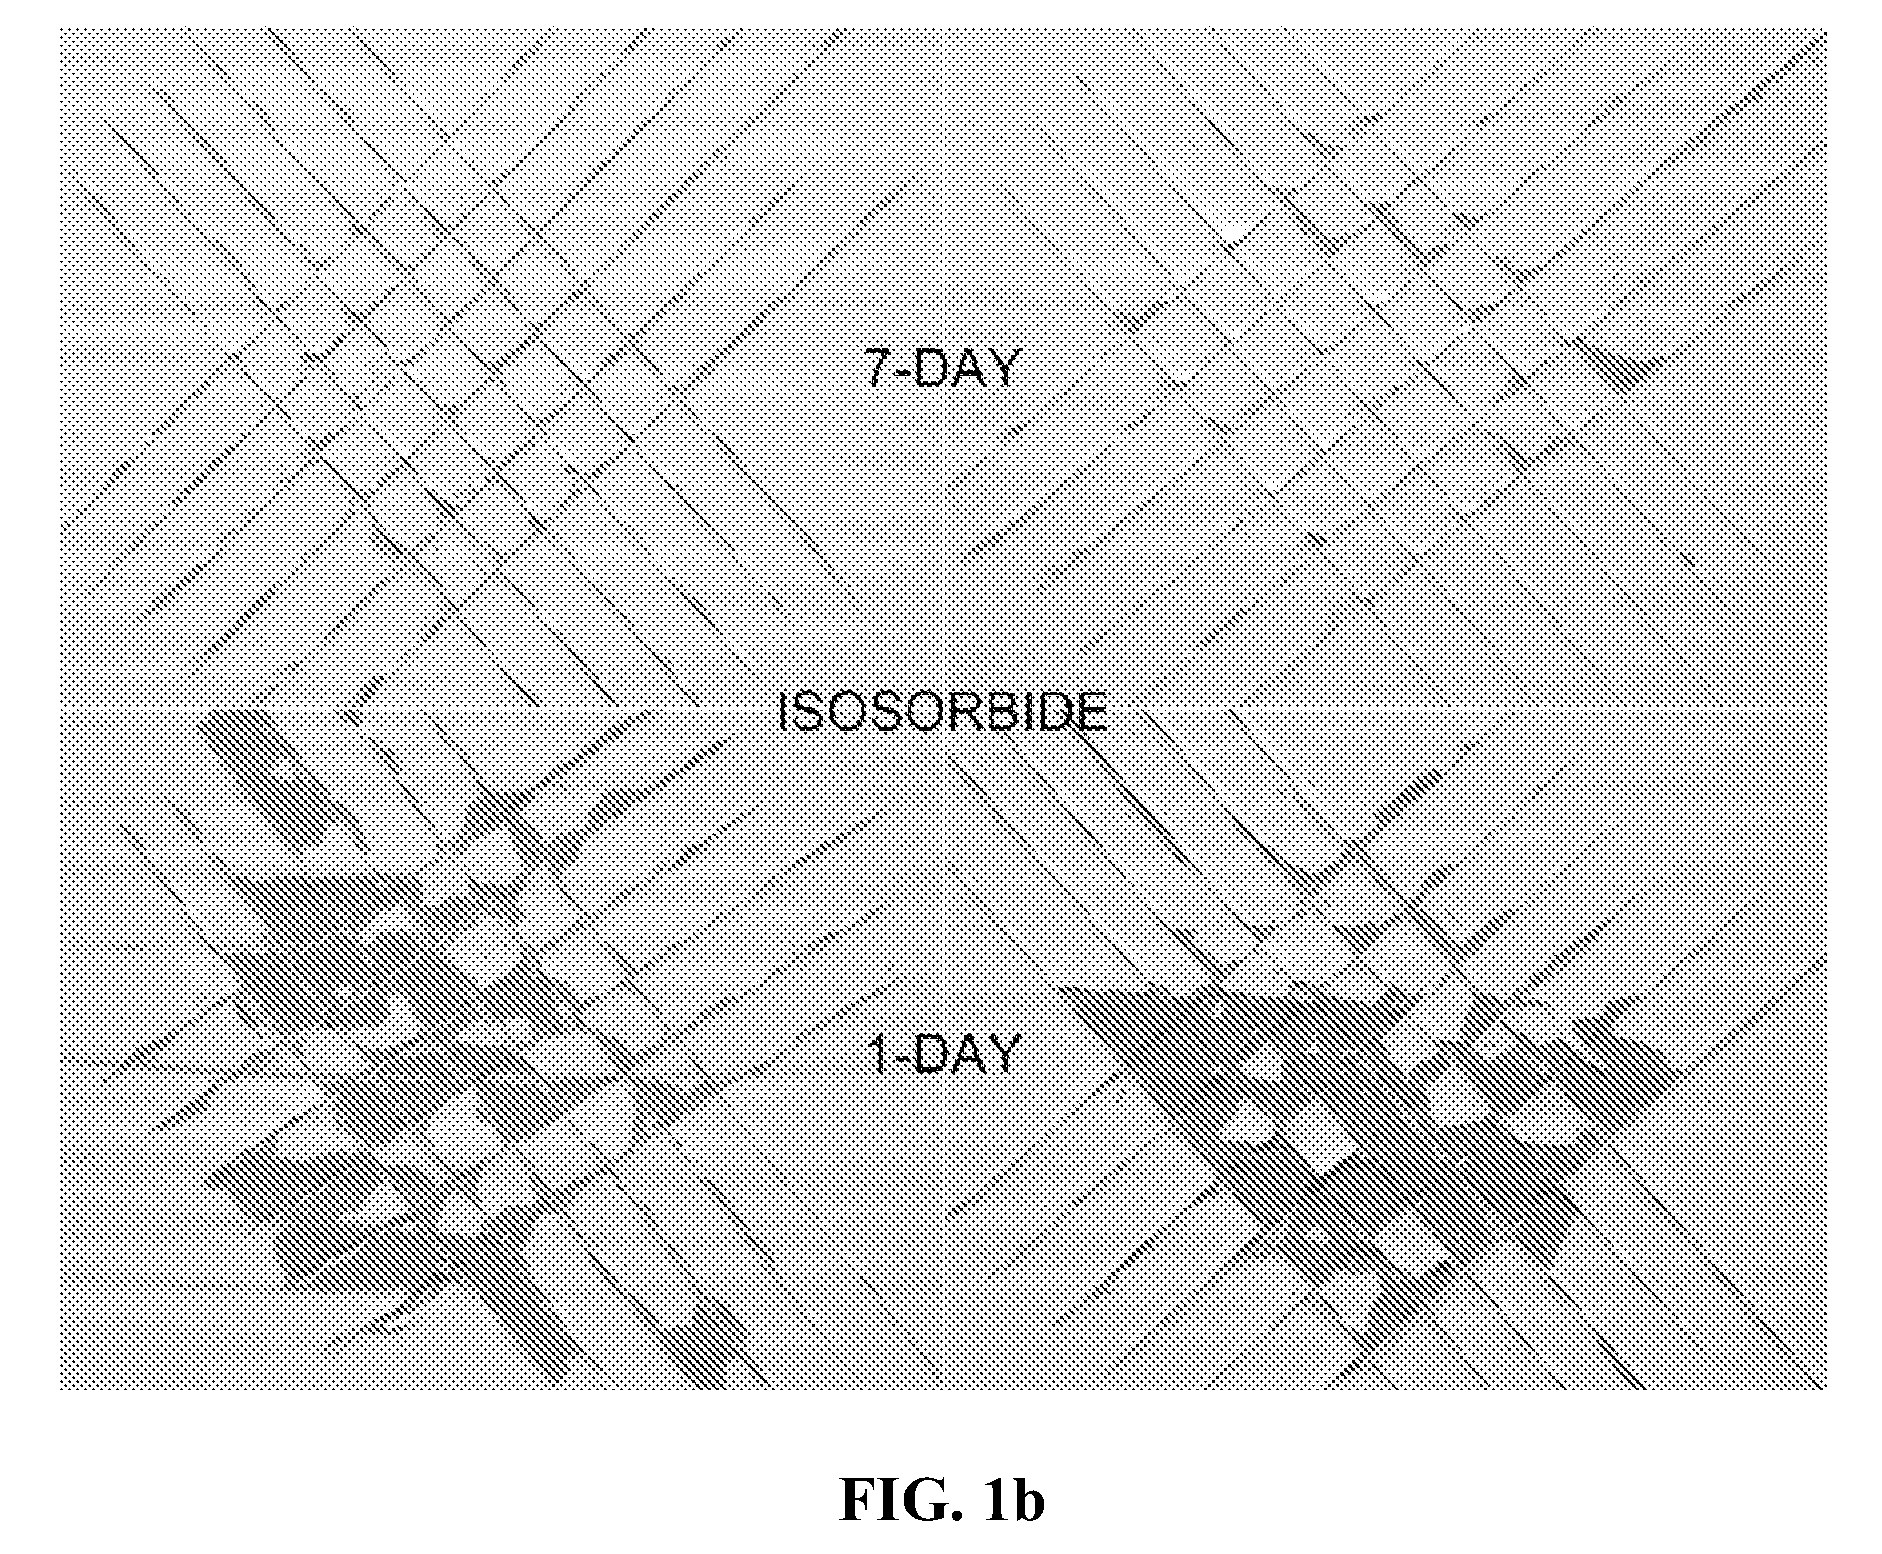 Waterborne Film-Forming Compositions Containing Reactive Surfactants and/or Humectants